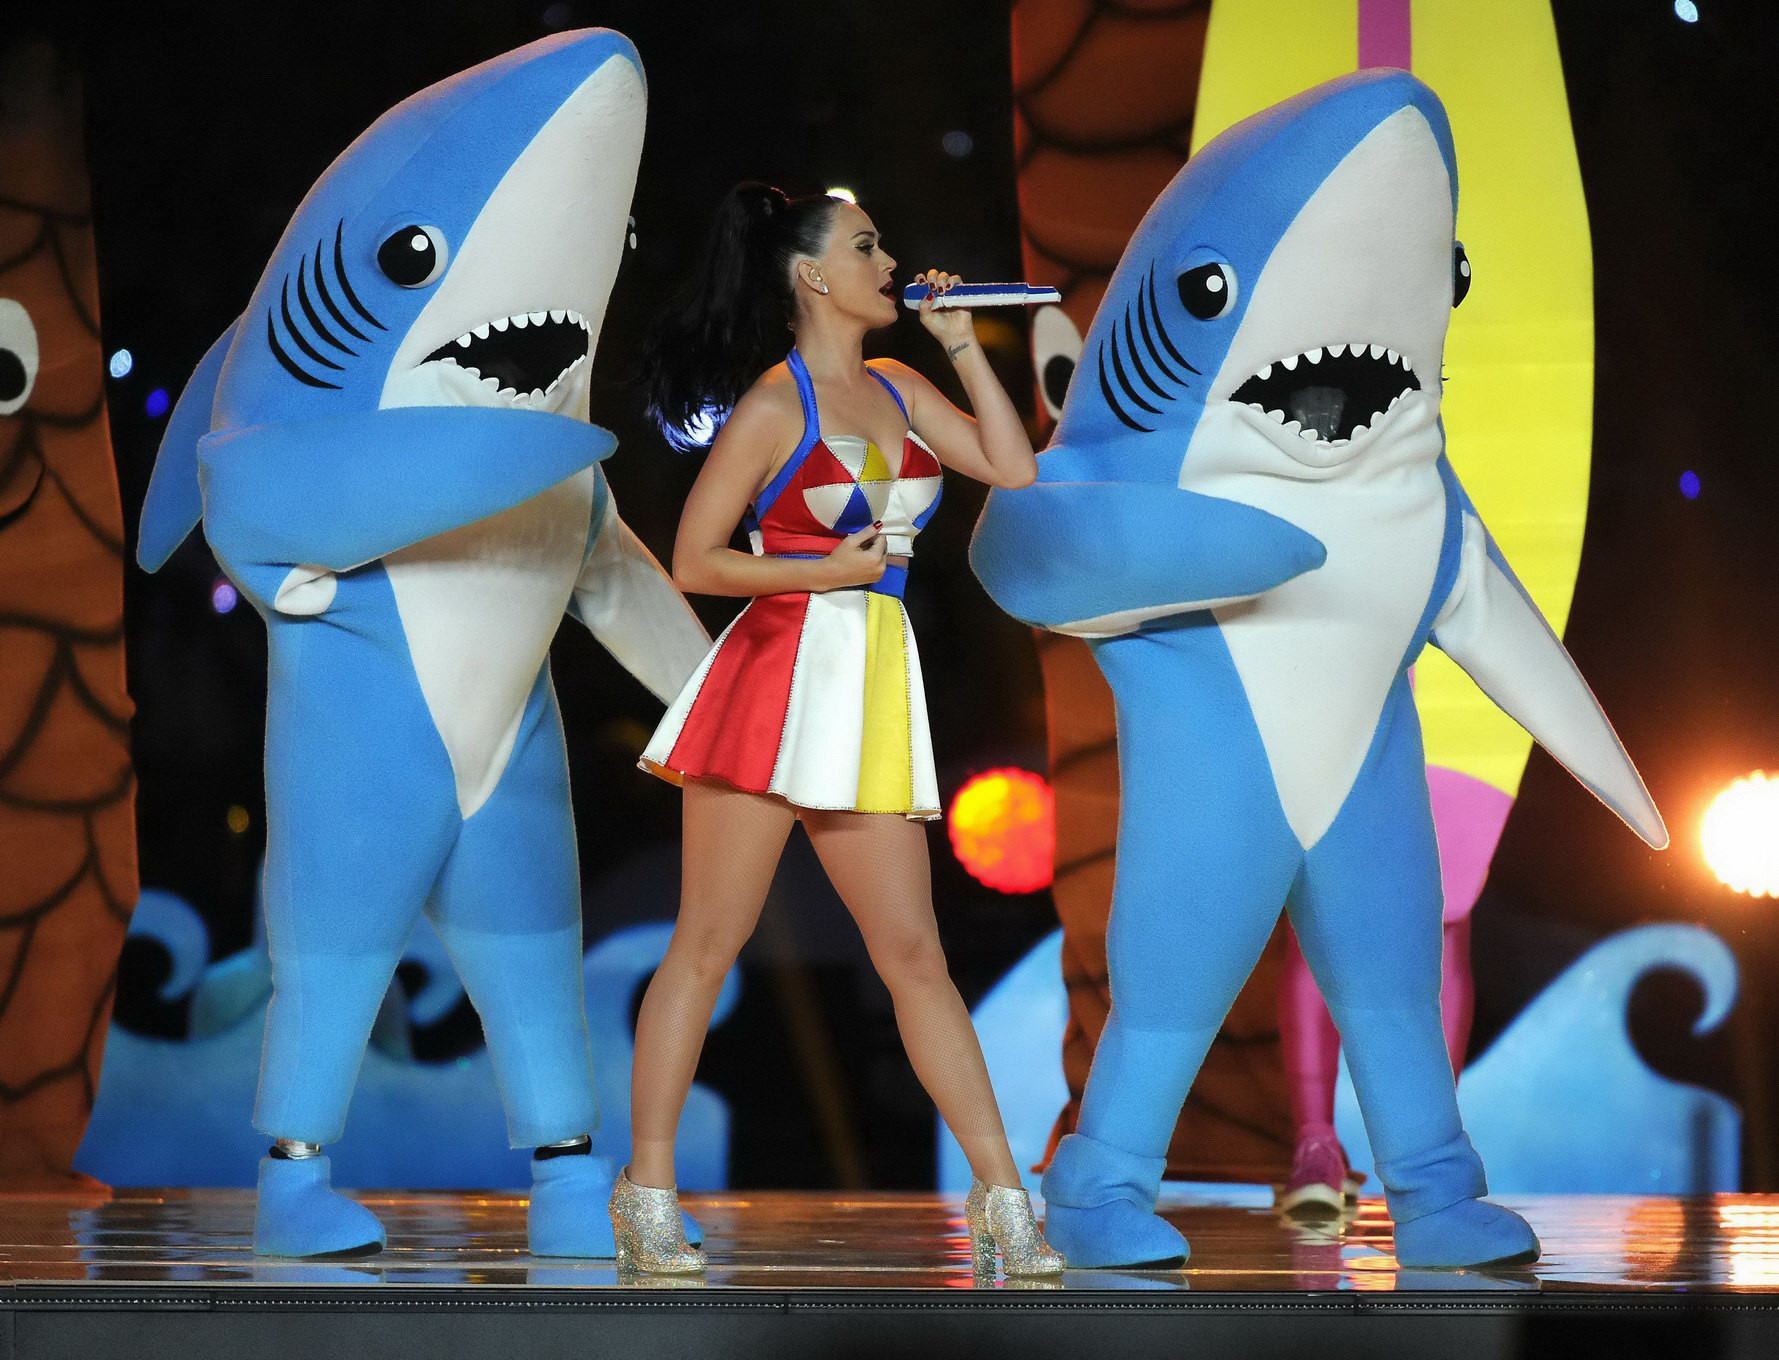 Katy Perry busty and leggy in tiny colorful mini dress performing on Super Bowl  #75174192